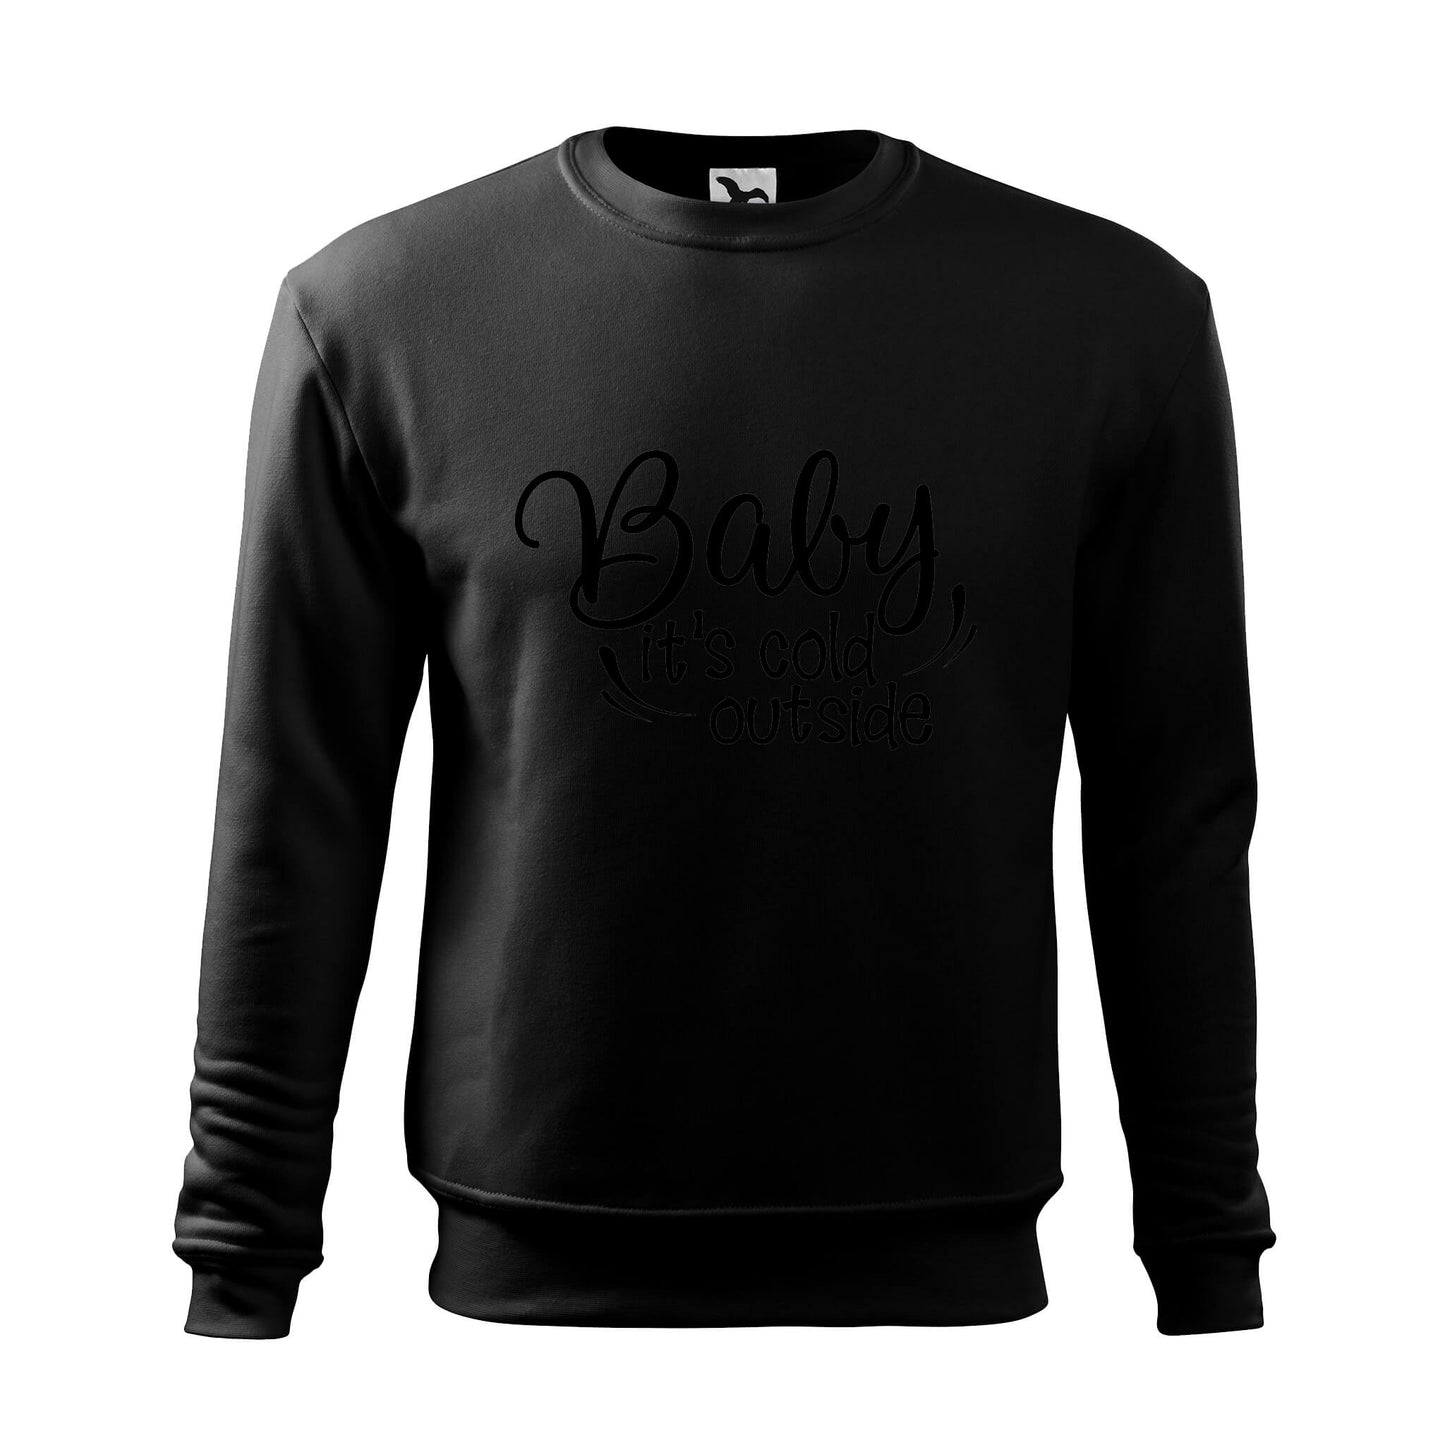 Baby its cold outside sweatshirt - rvdesignprint